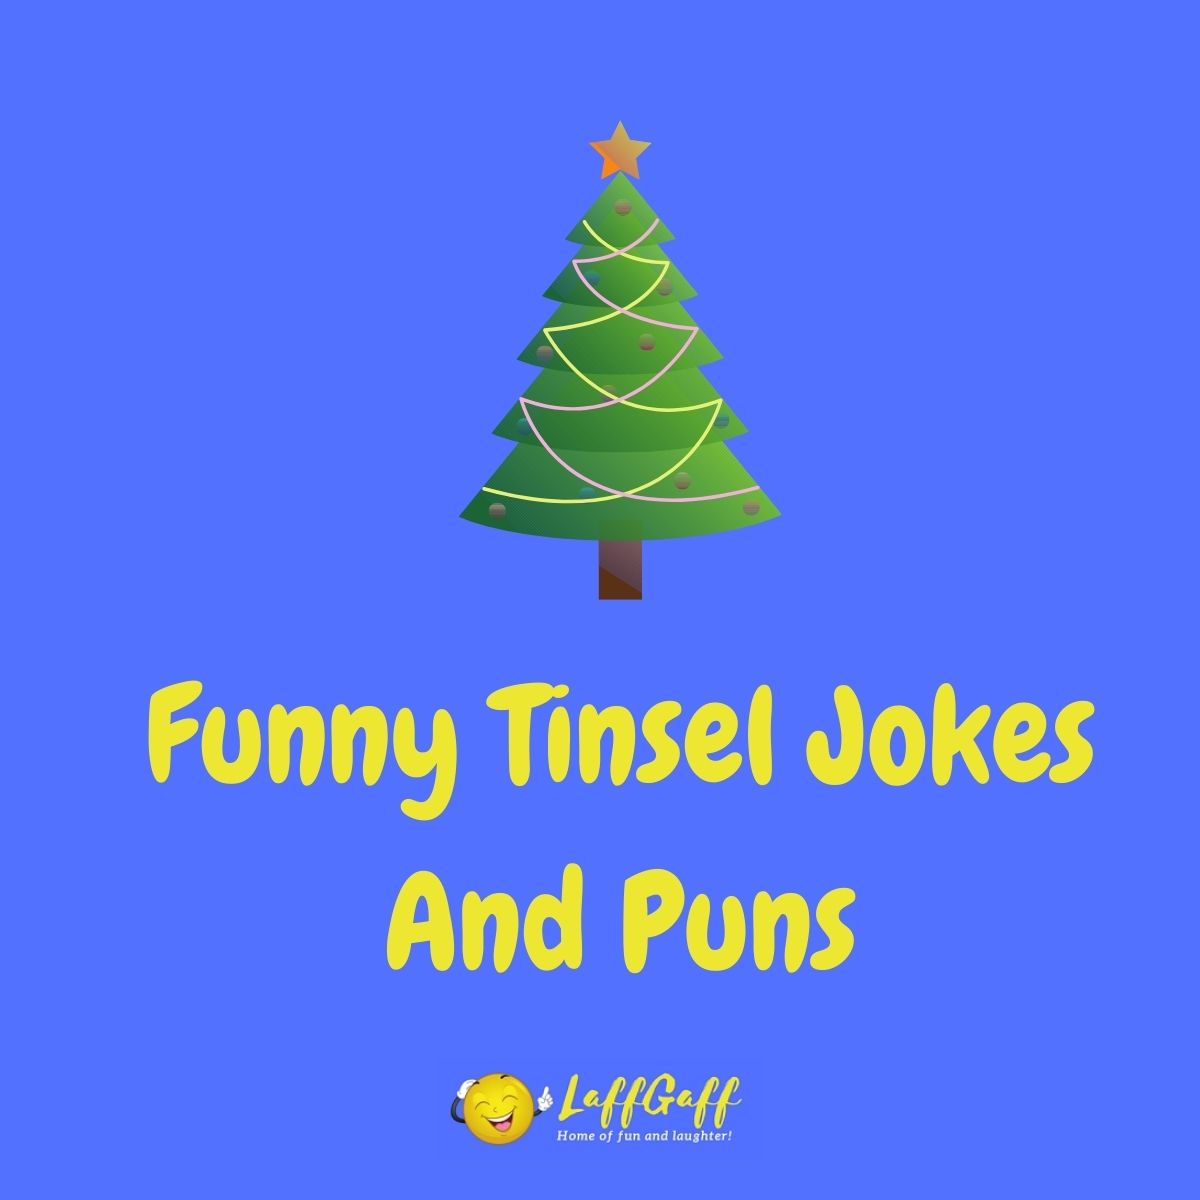 Featured image for a page of funny tinsel jokes and puns.